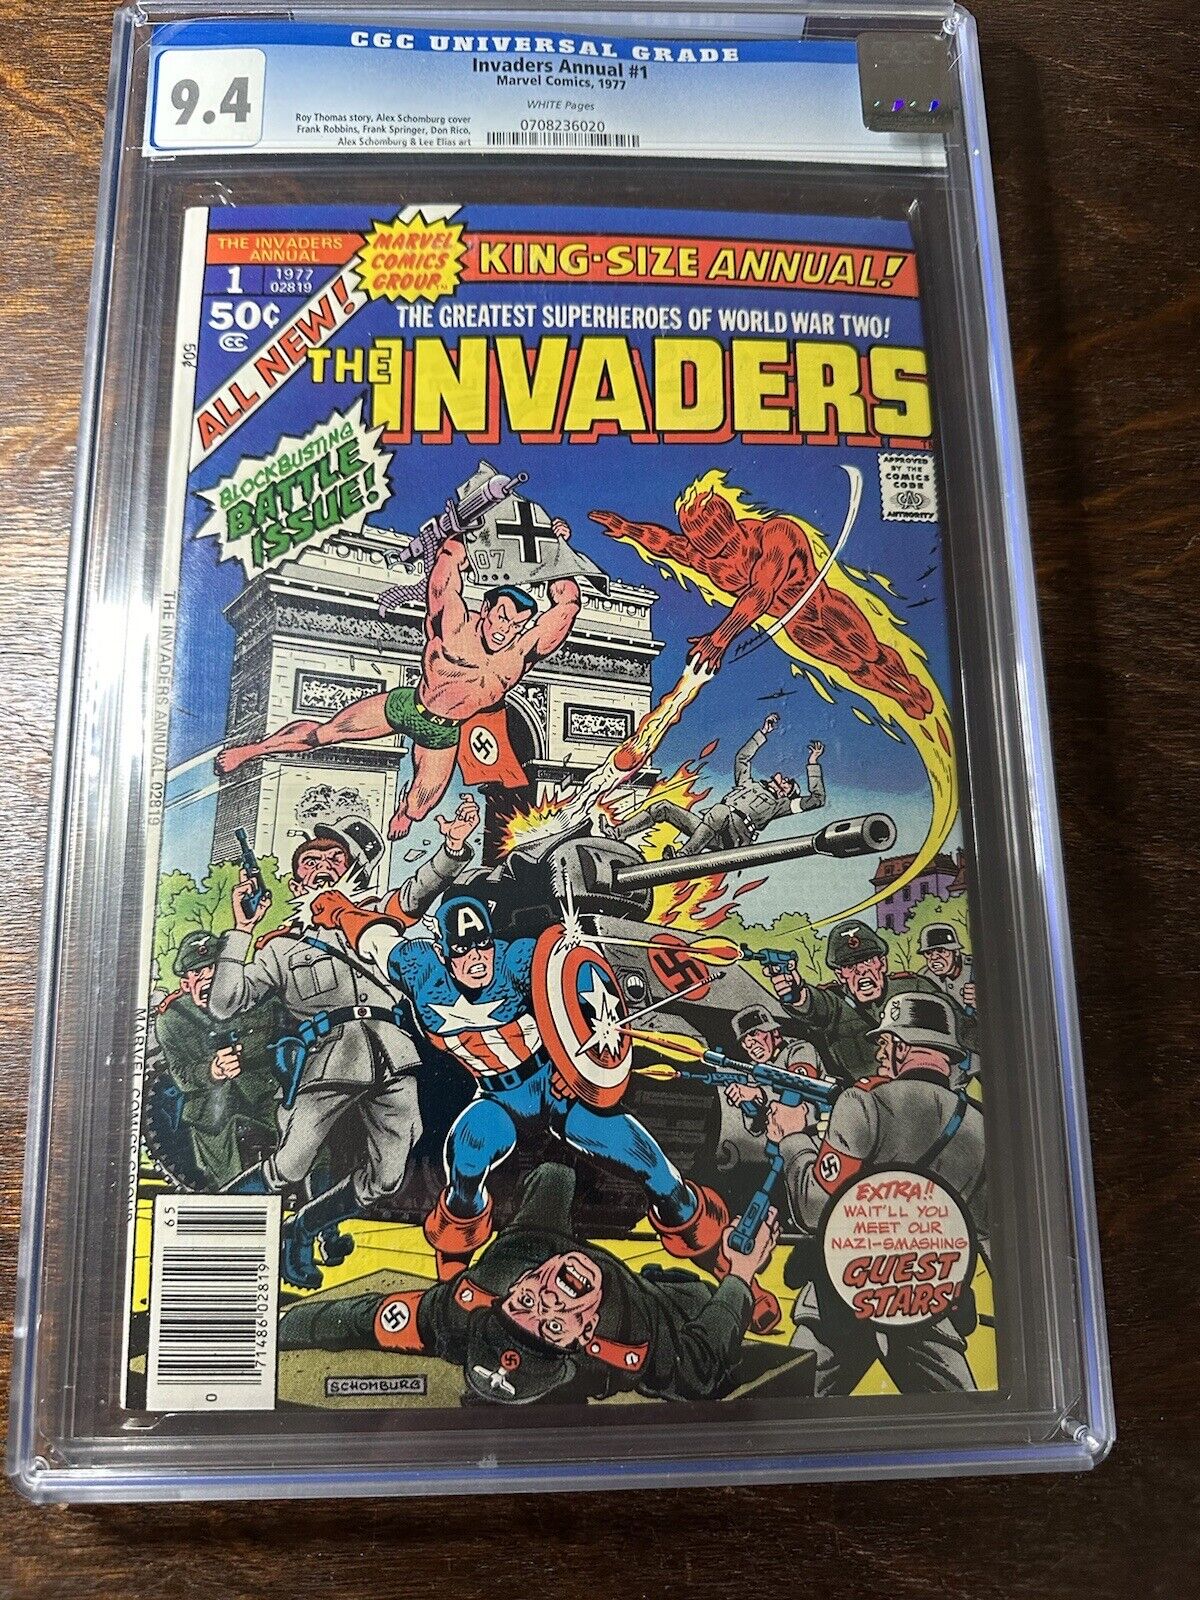 Marvel Comics Invaders King-Size Annual #1 (1977) CGC 9.4 White Pages